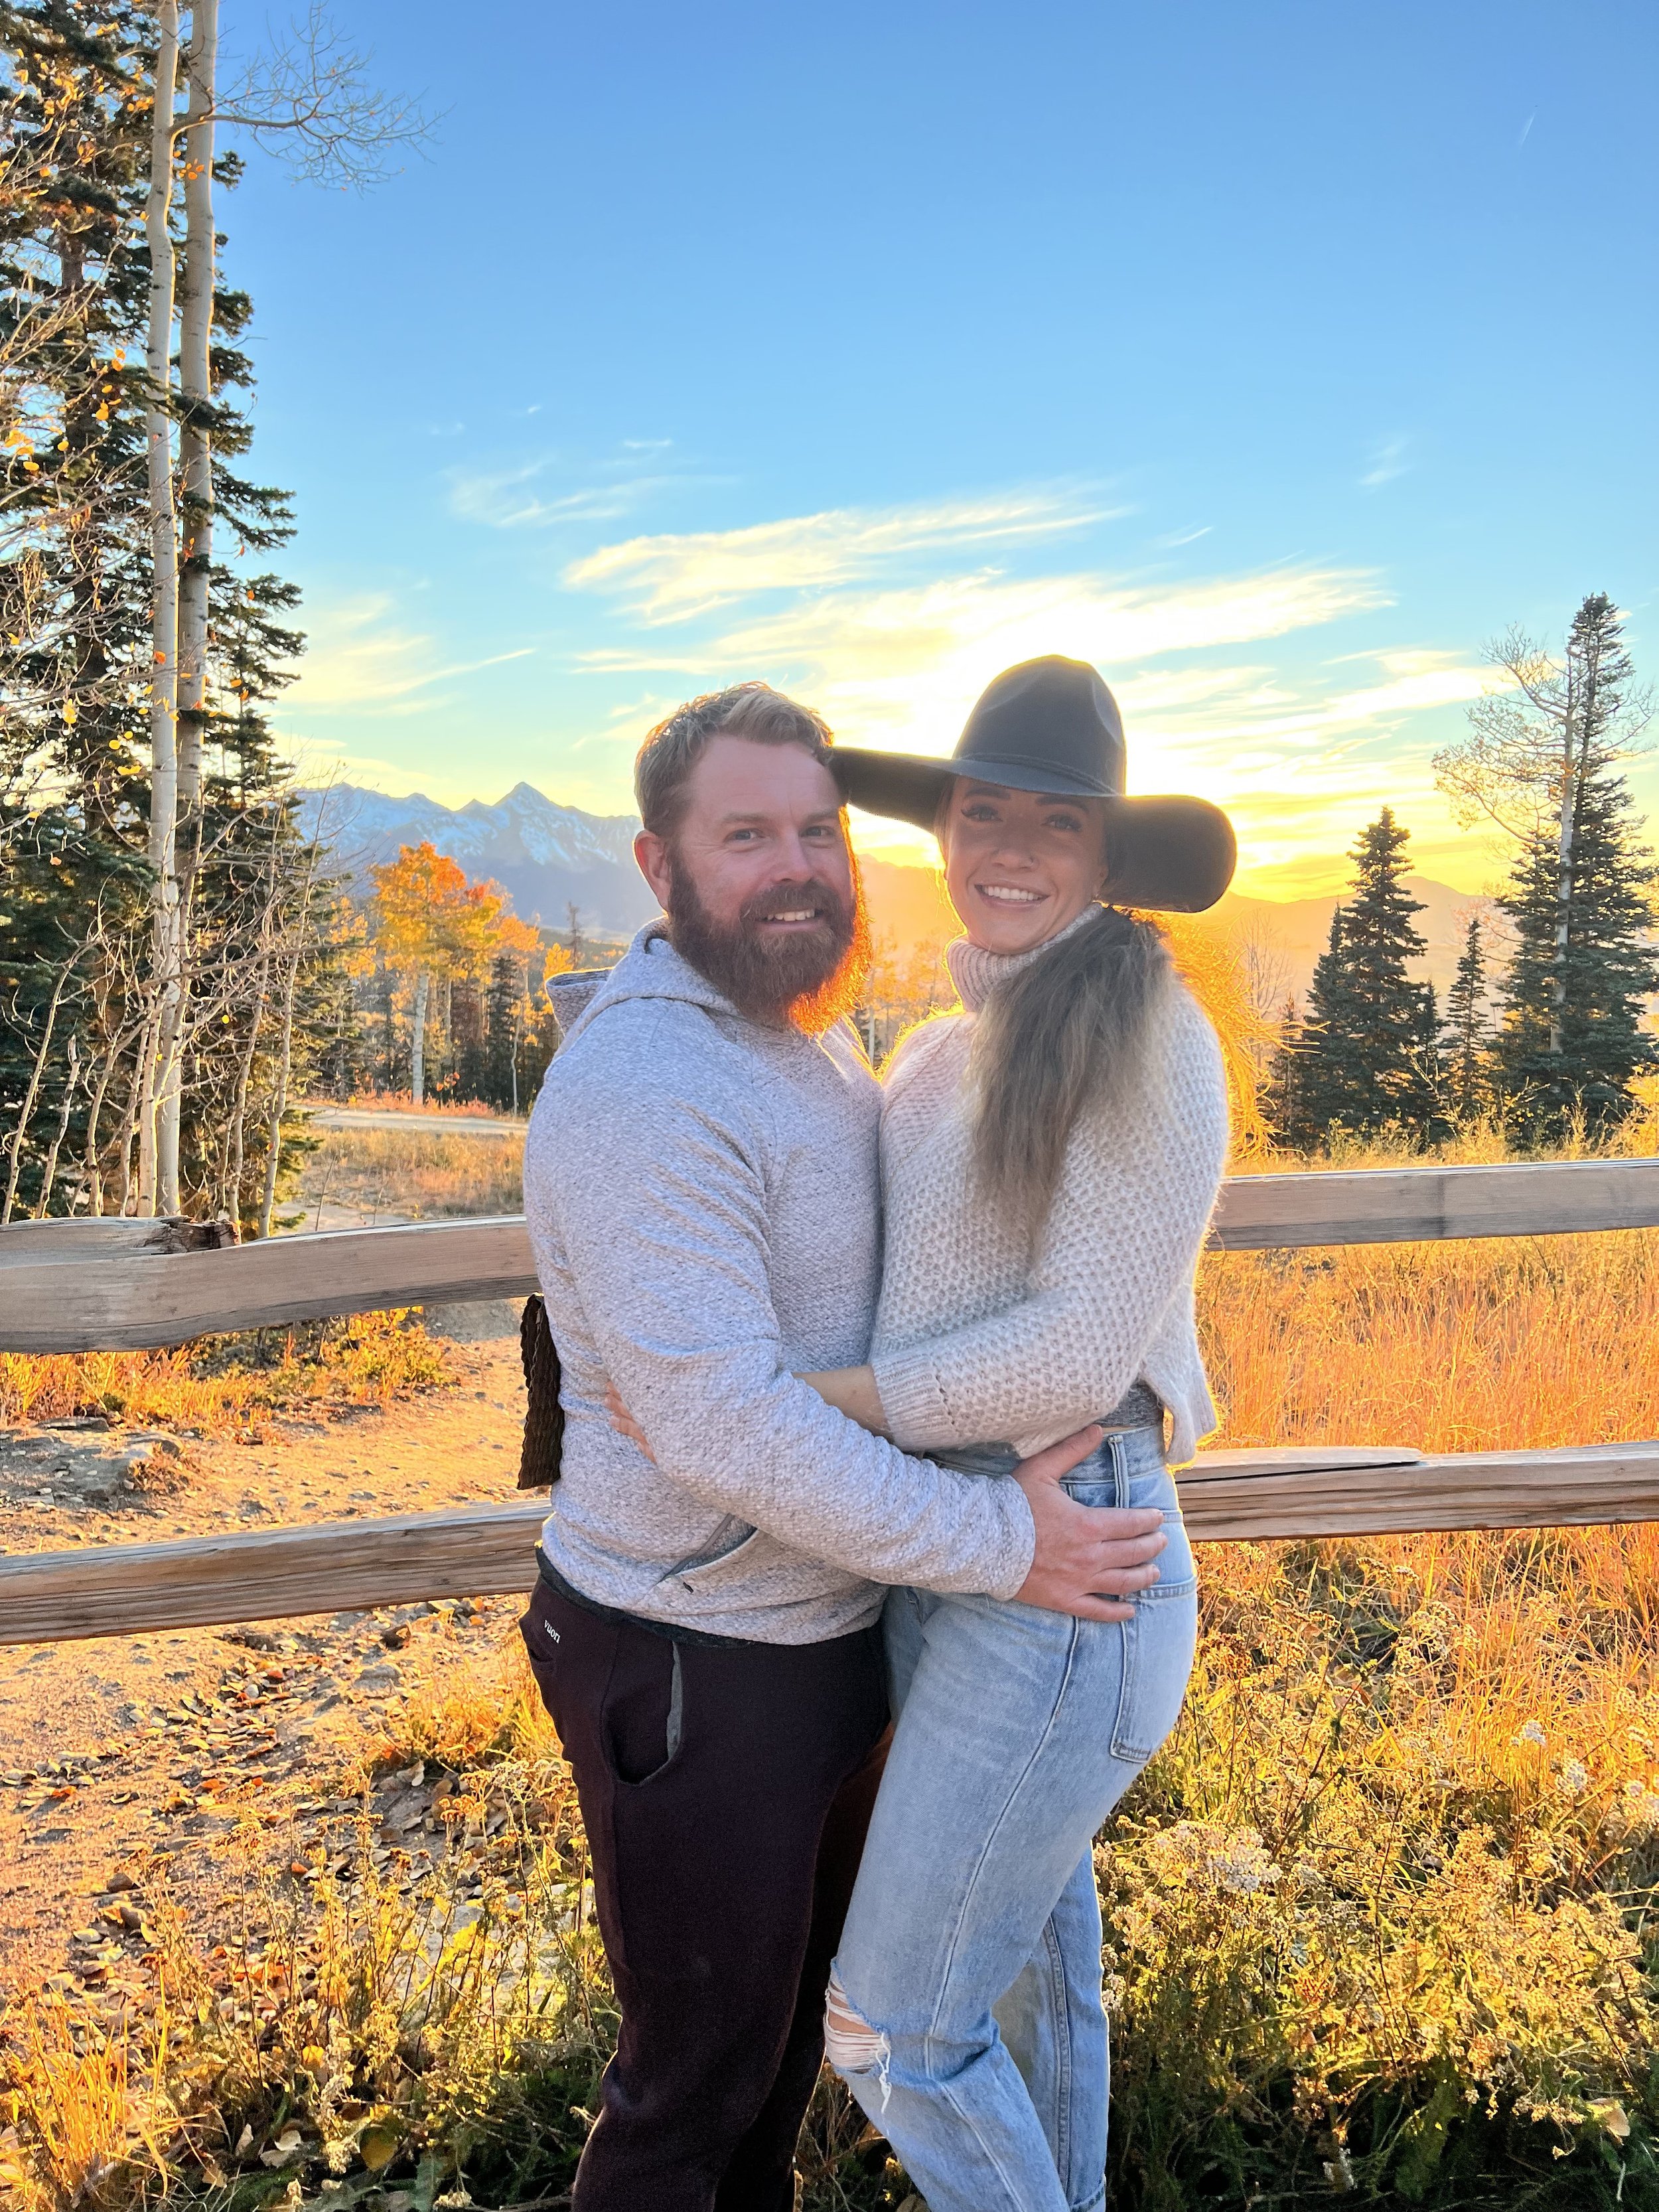 Dogma Athletica personal trainers Bryan and Katie are happy to share the news of their engagement with the Vail Valley community in Avon and Edwards Colorado.